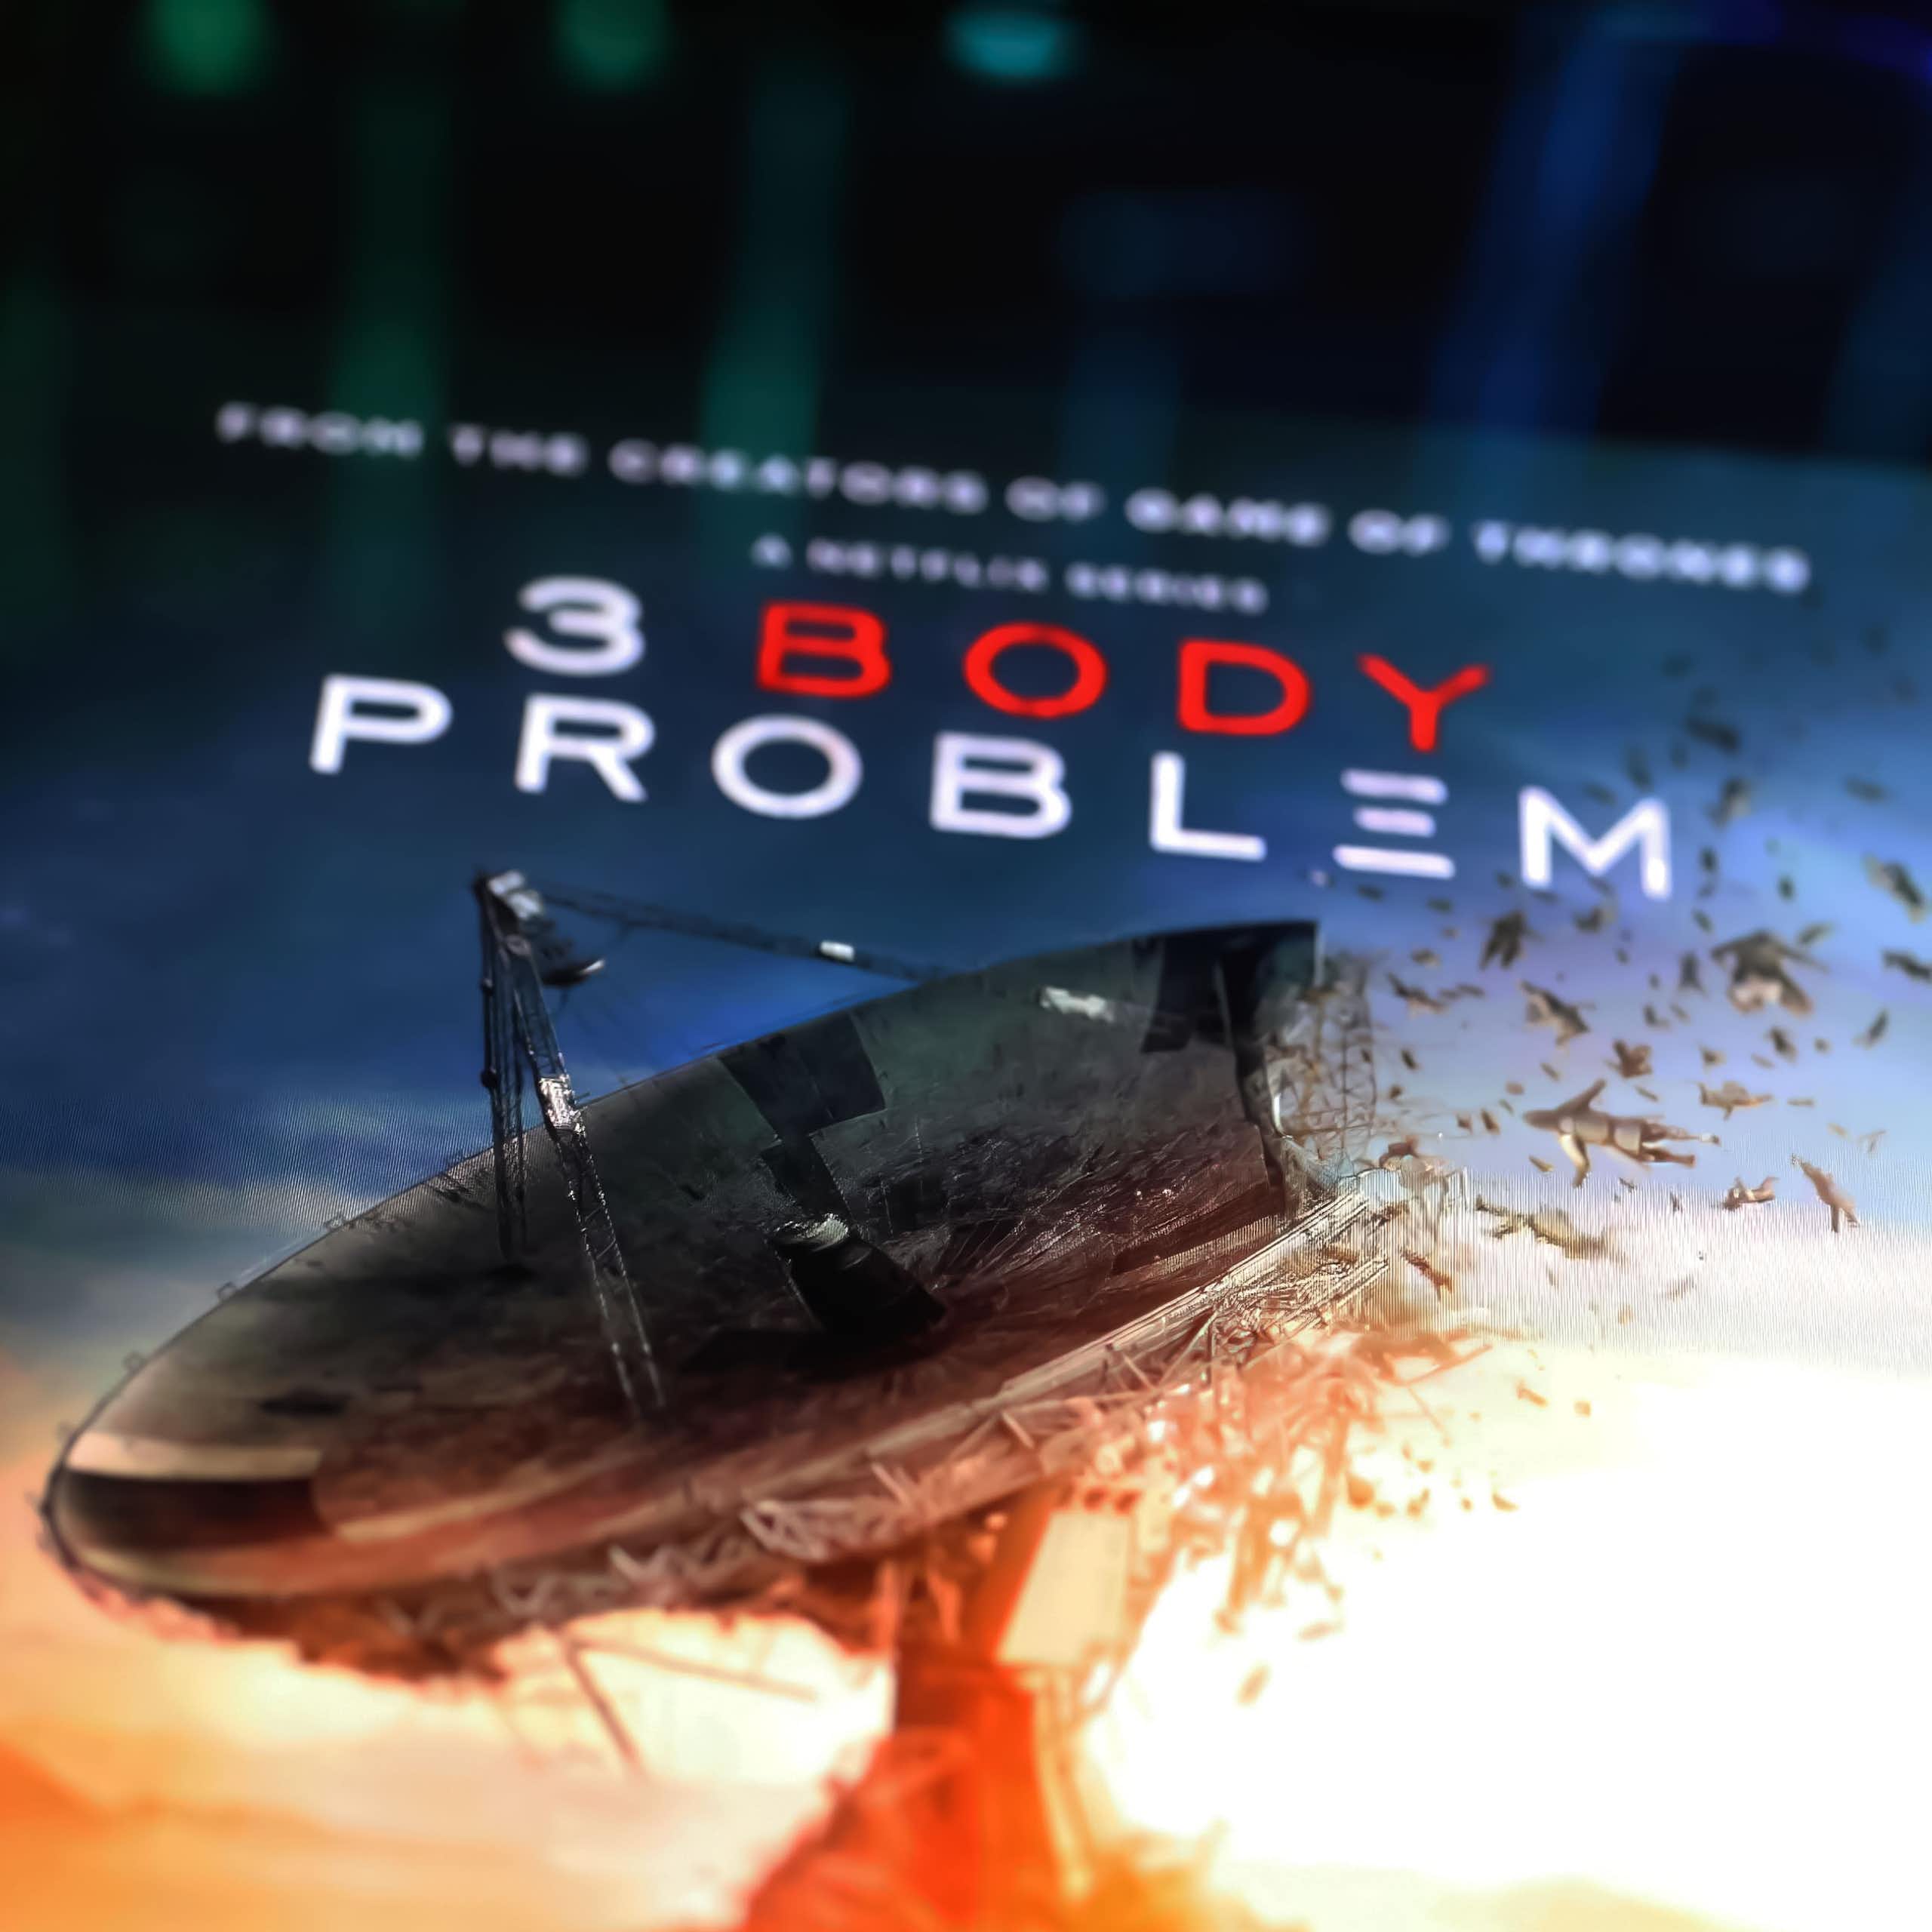 promotional poster showing a disintegrating satellite dish and the text "3 Body Problem"